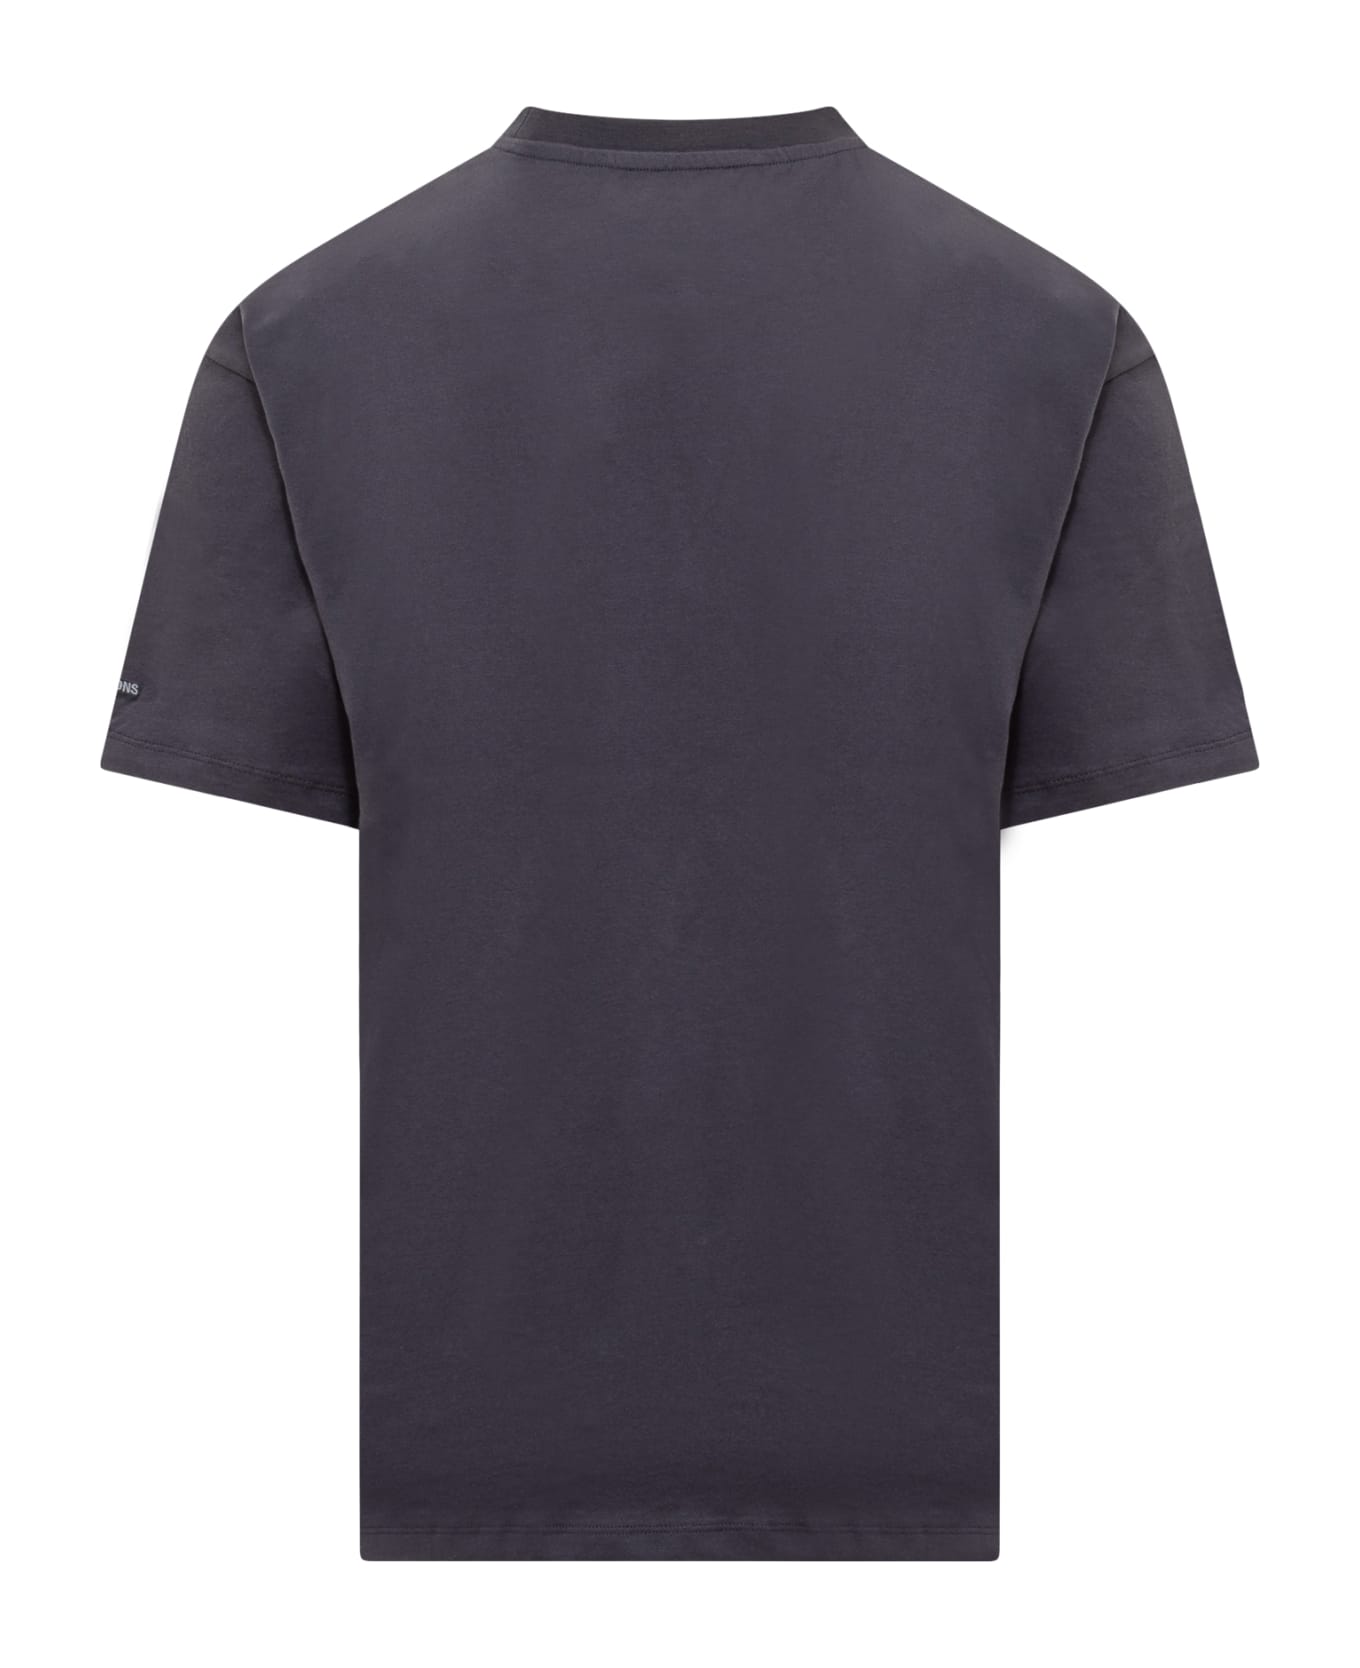 Fred Perry by Raf Simons Fred Perry X Raf Simons T-shirt With Print - NAVY BLUE